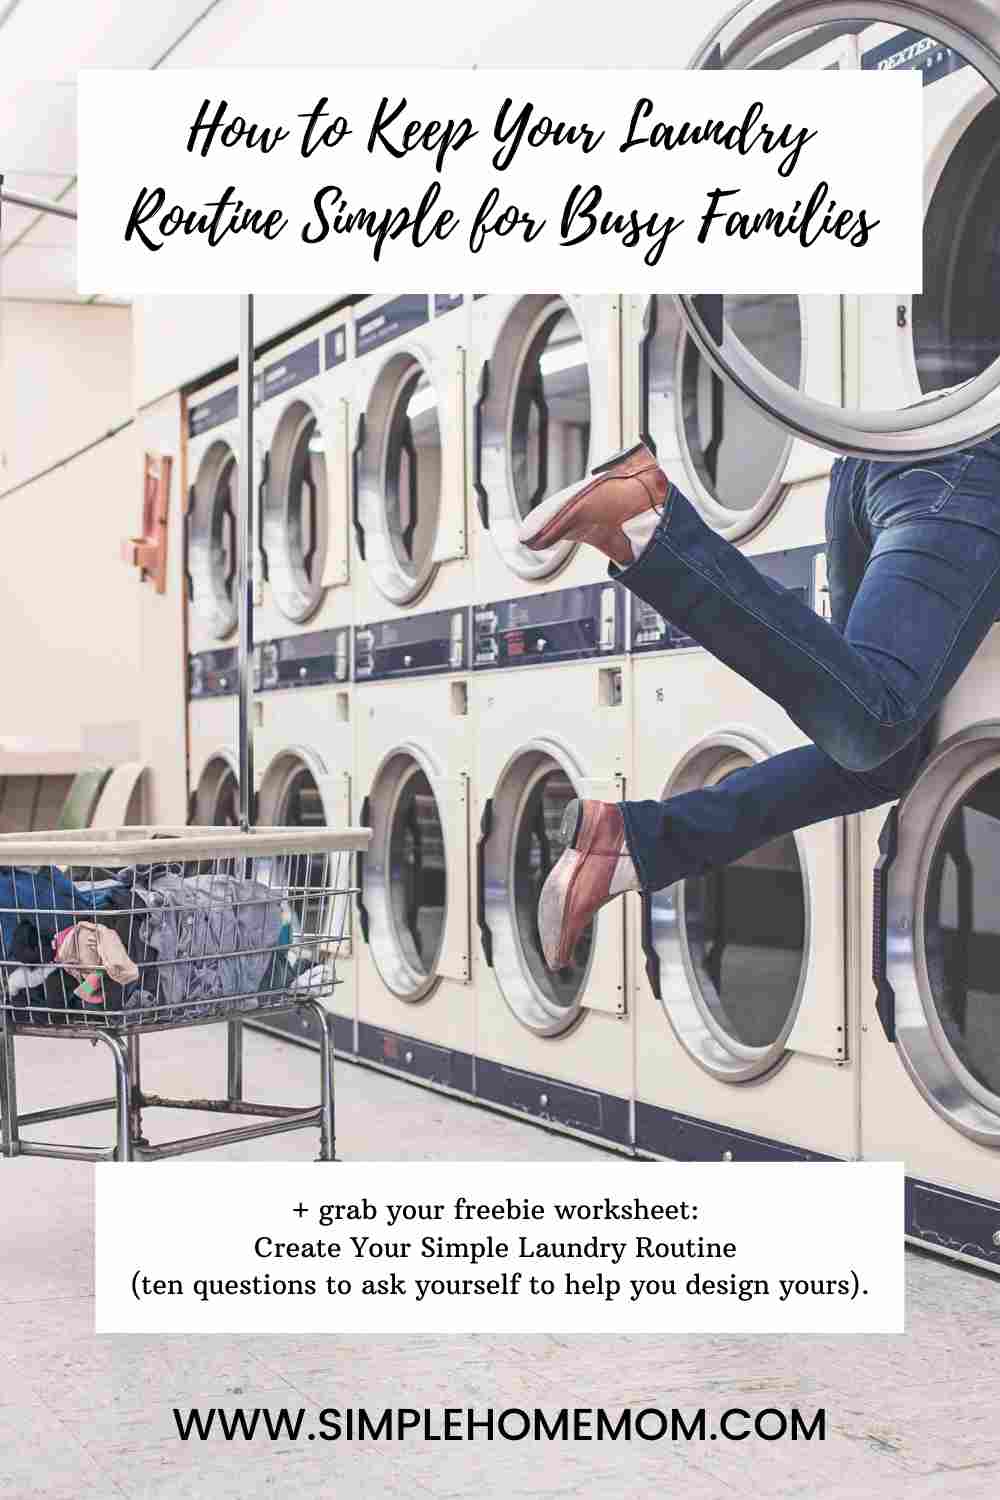 A picture of a person falling into a washer.